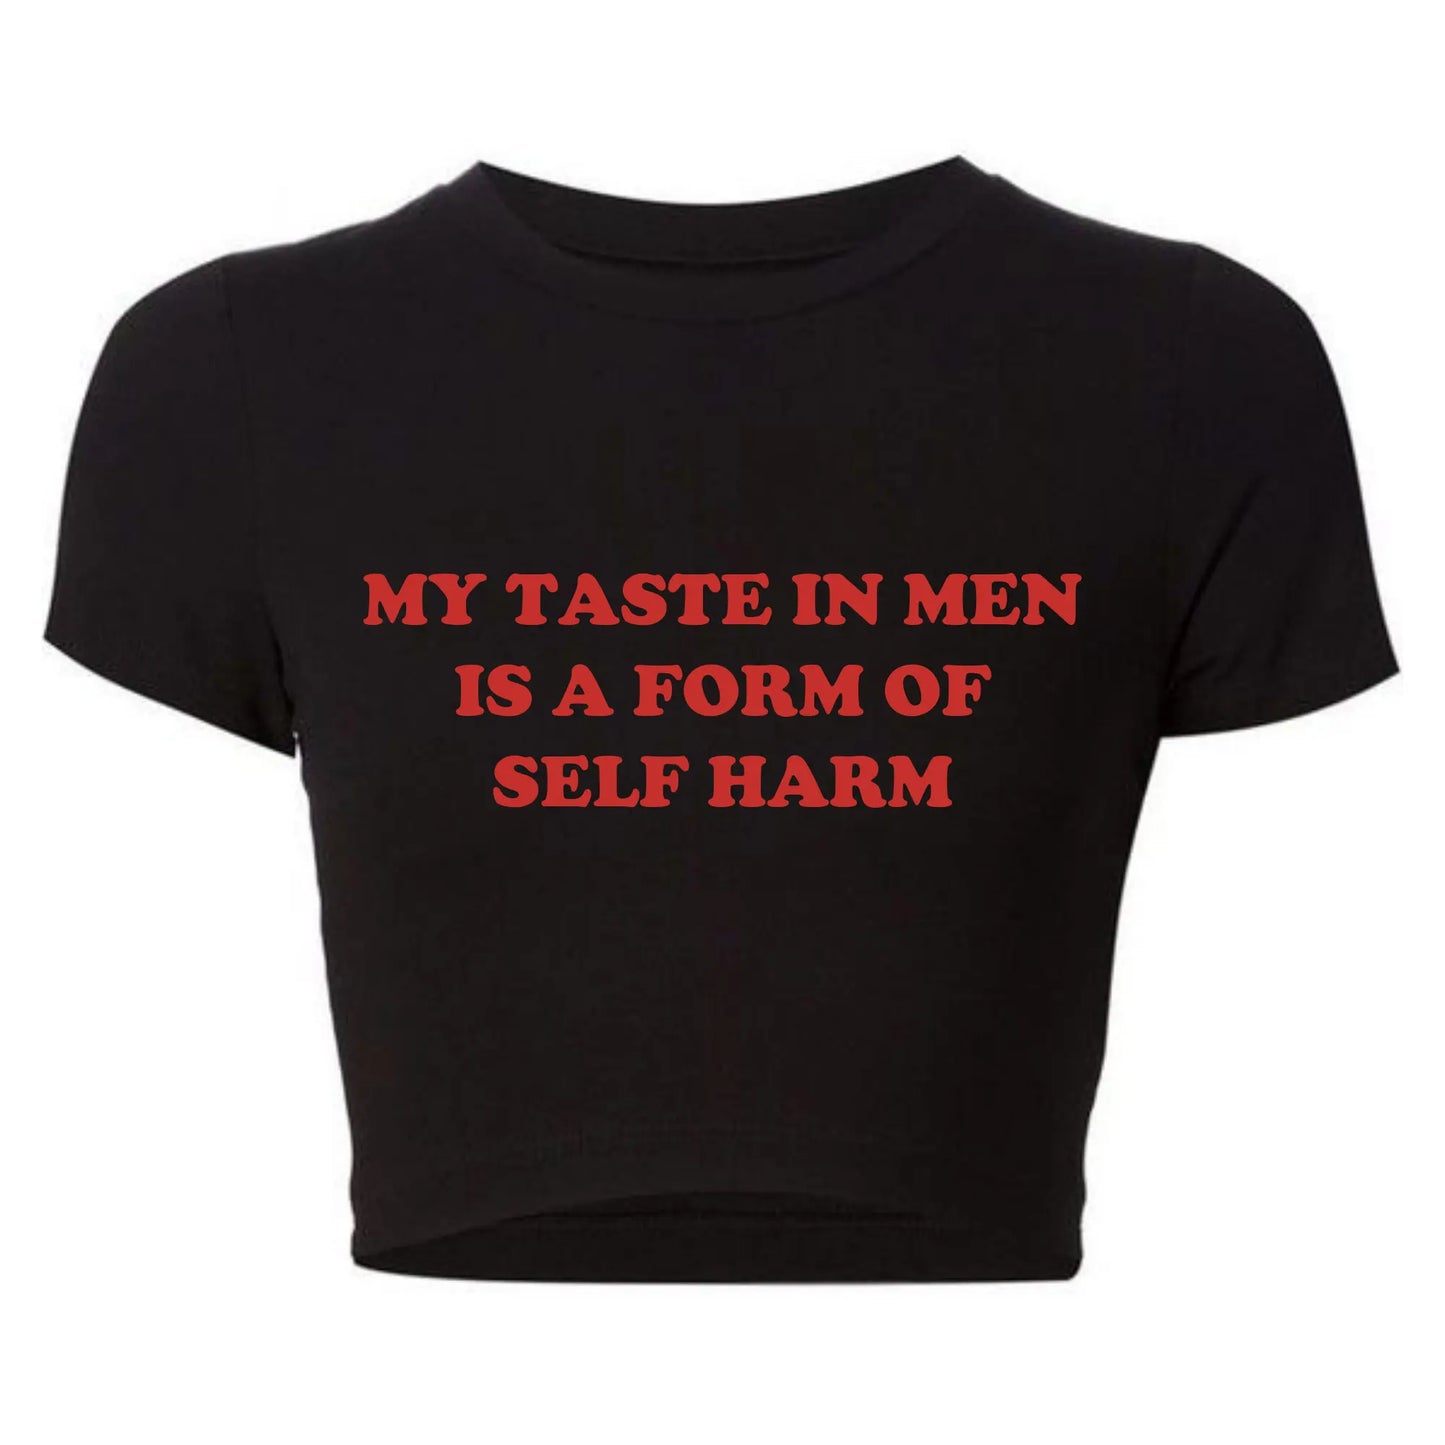 Tasty- the My Taste in Men Is a Form of Self Harm Cropped Tee Shirt 6 Color Ways